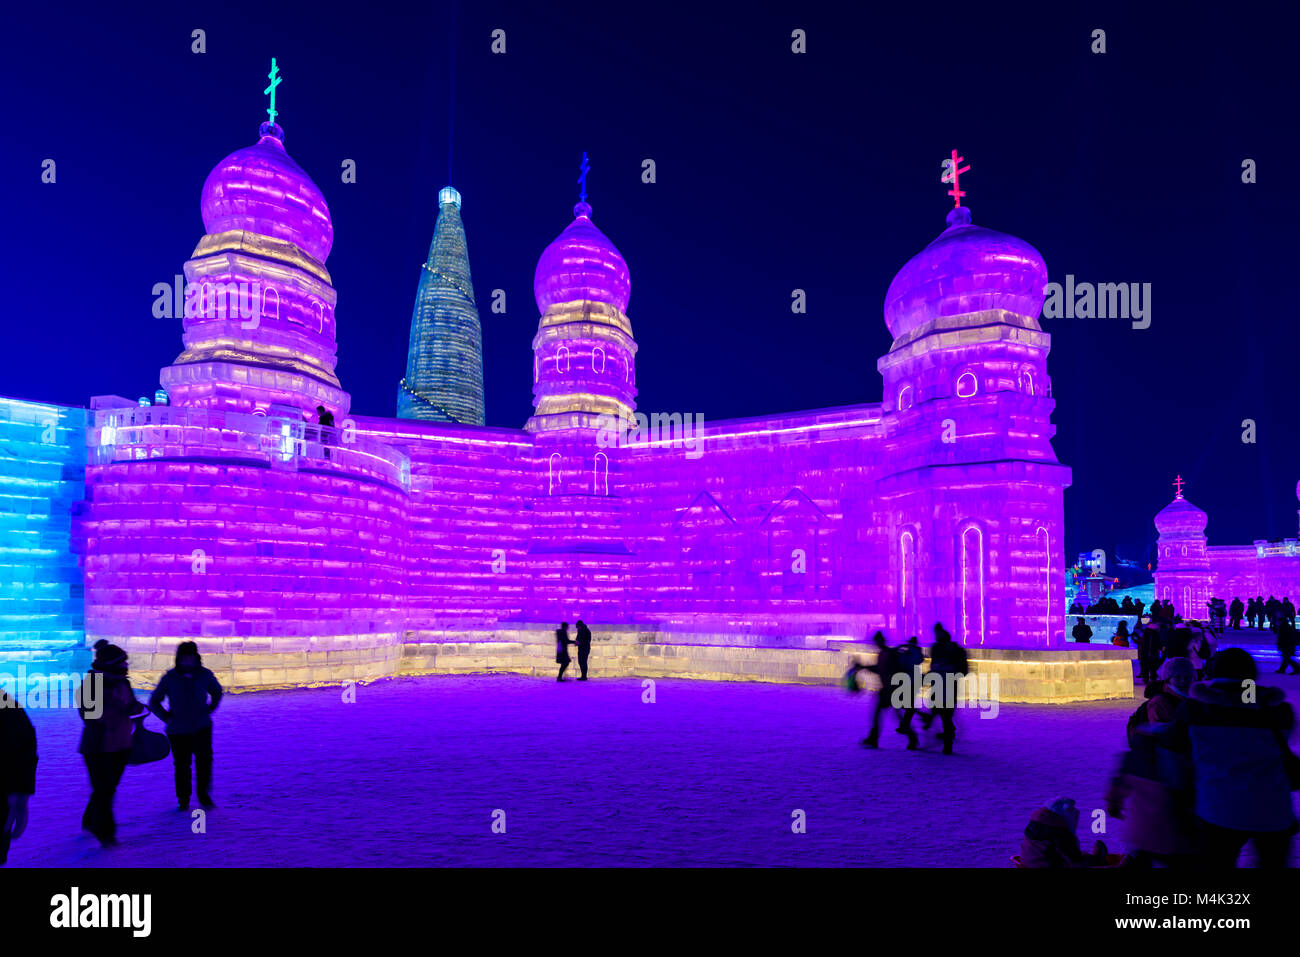 Harbin, Heilongjiang, China is host to world renown Ice Sculpture Festival that is held every year during winter. Stock Photo